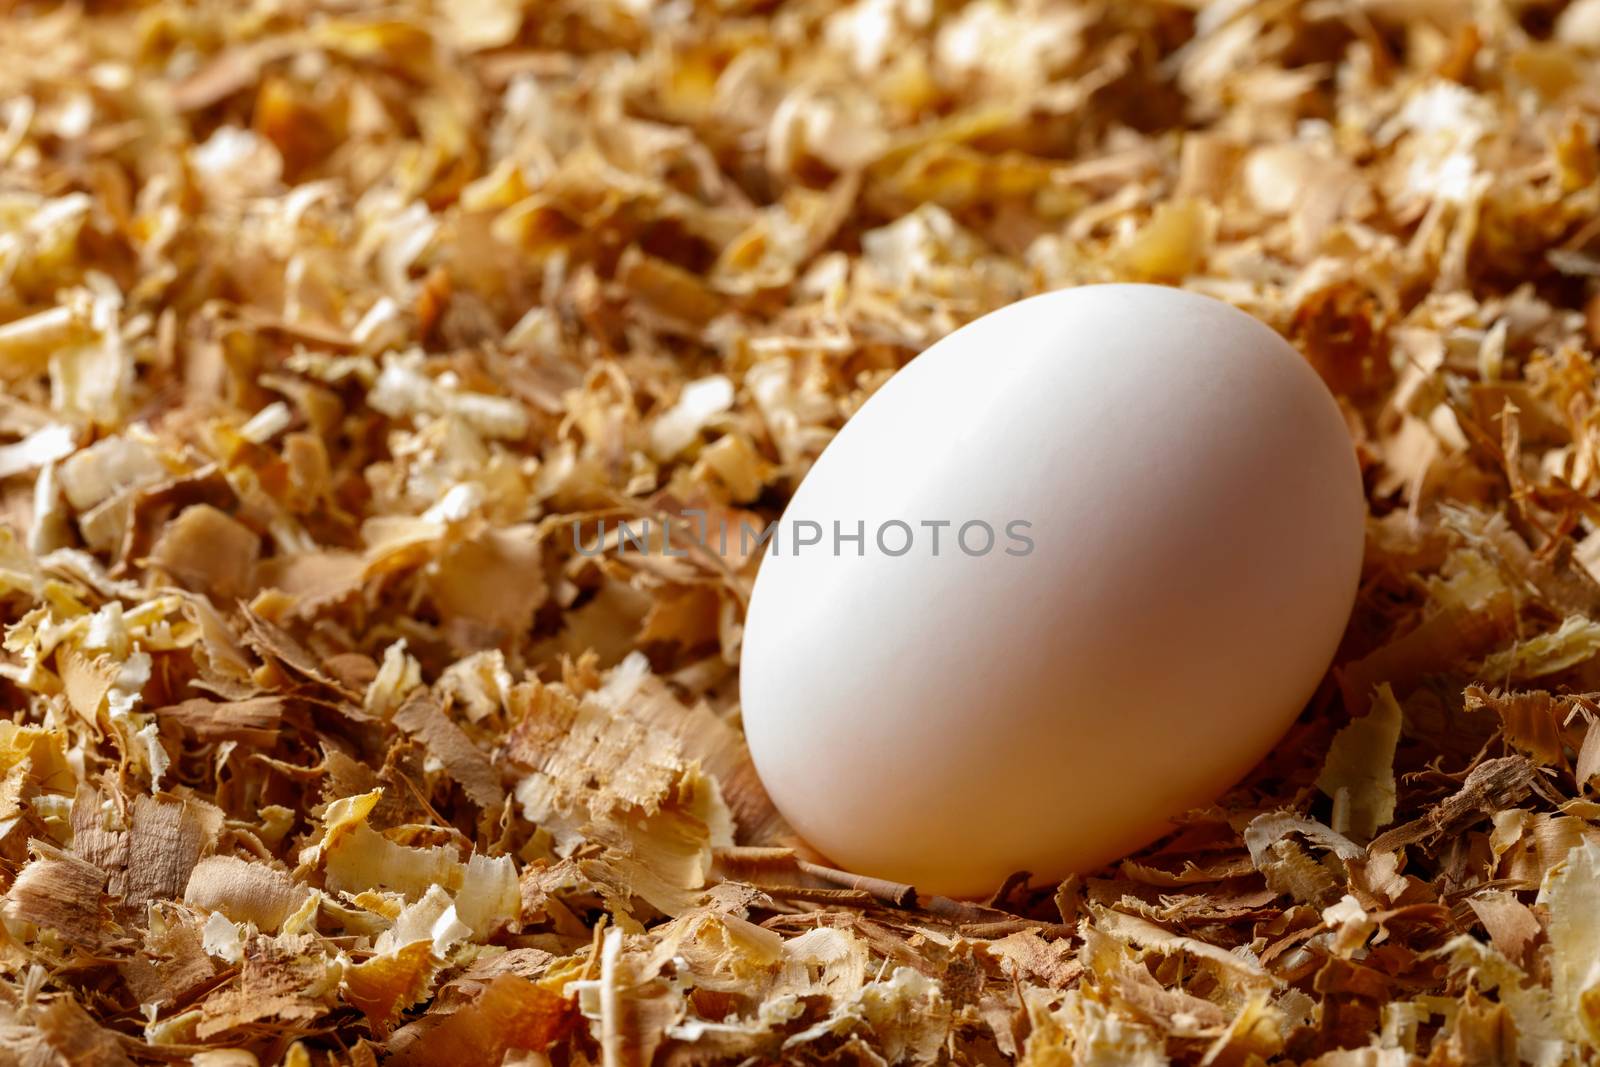 Hen chicken or duck egg on saw dust, organic food fresh from poultry farm